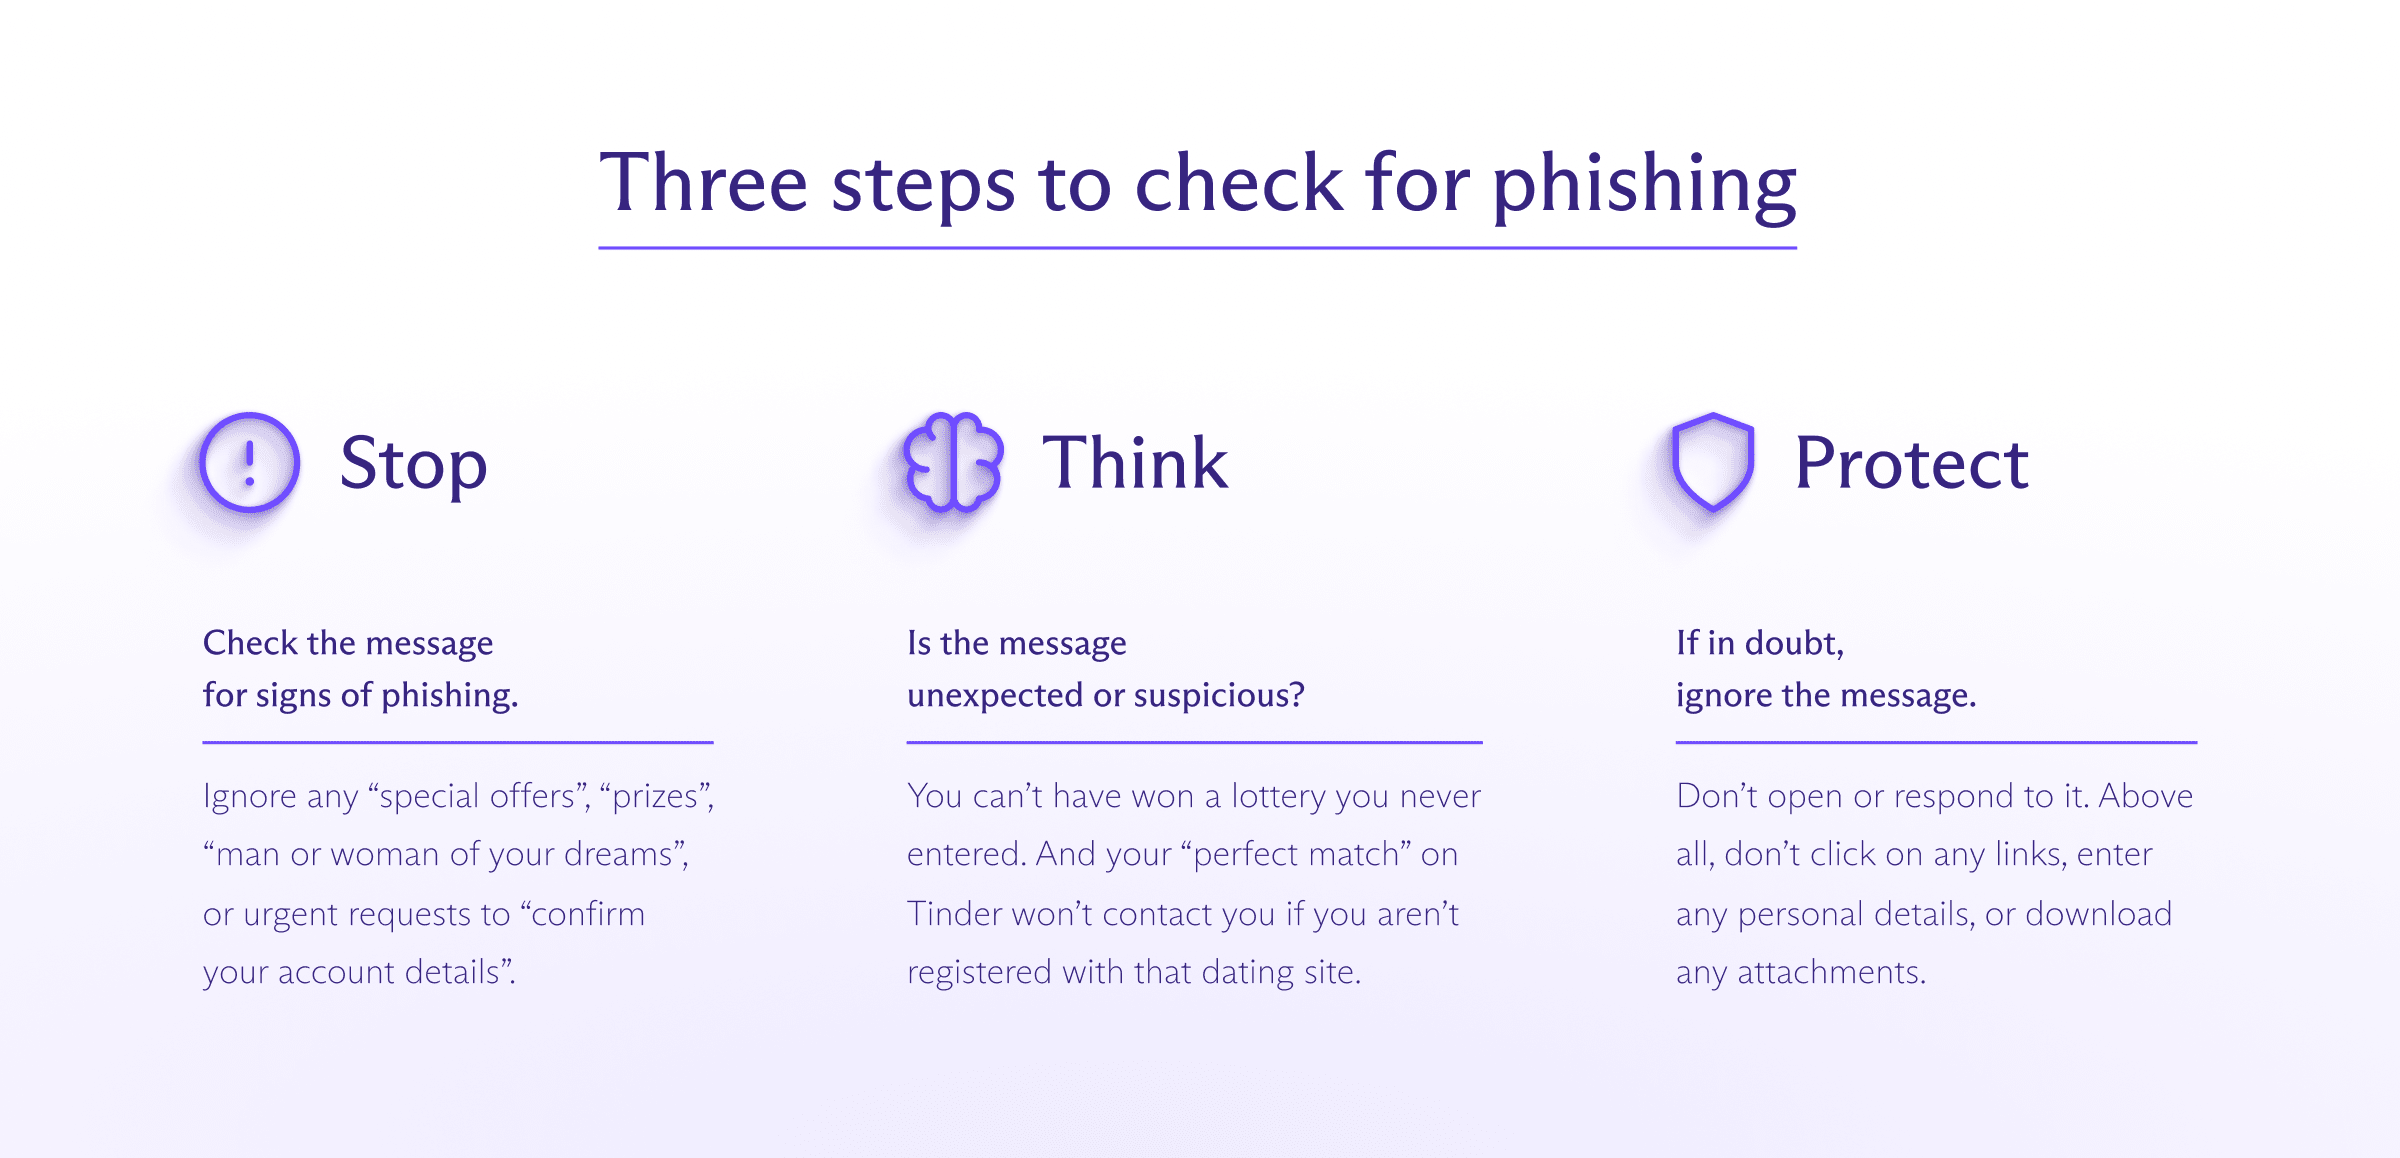 Three steps to check for phishing when you receive a suspicious email